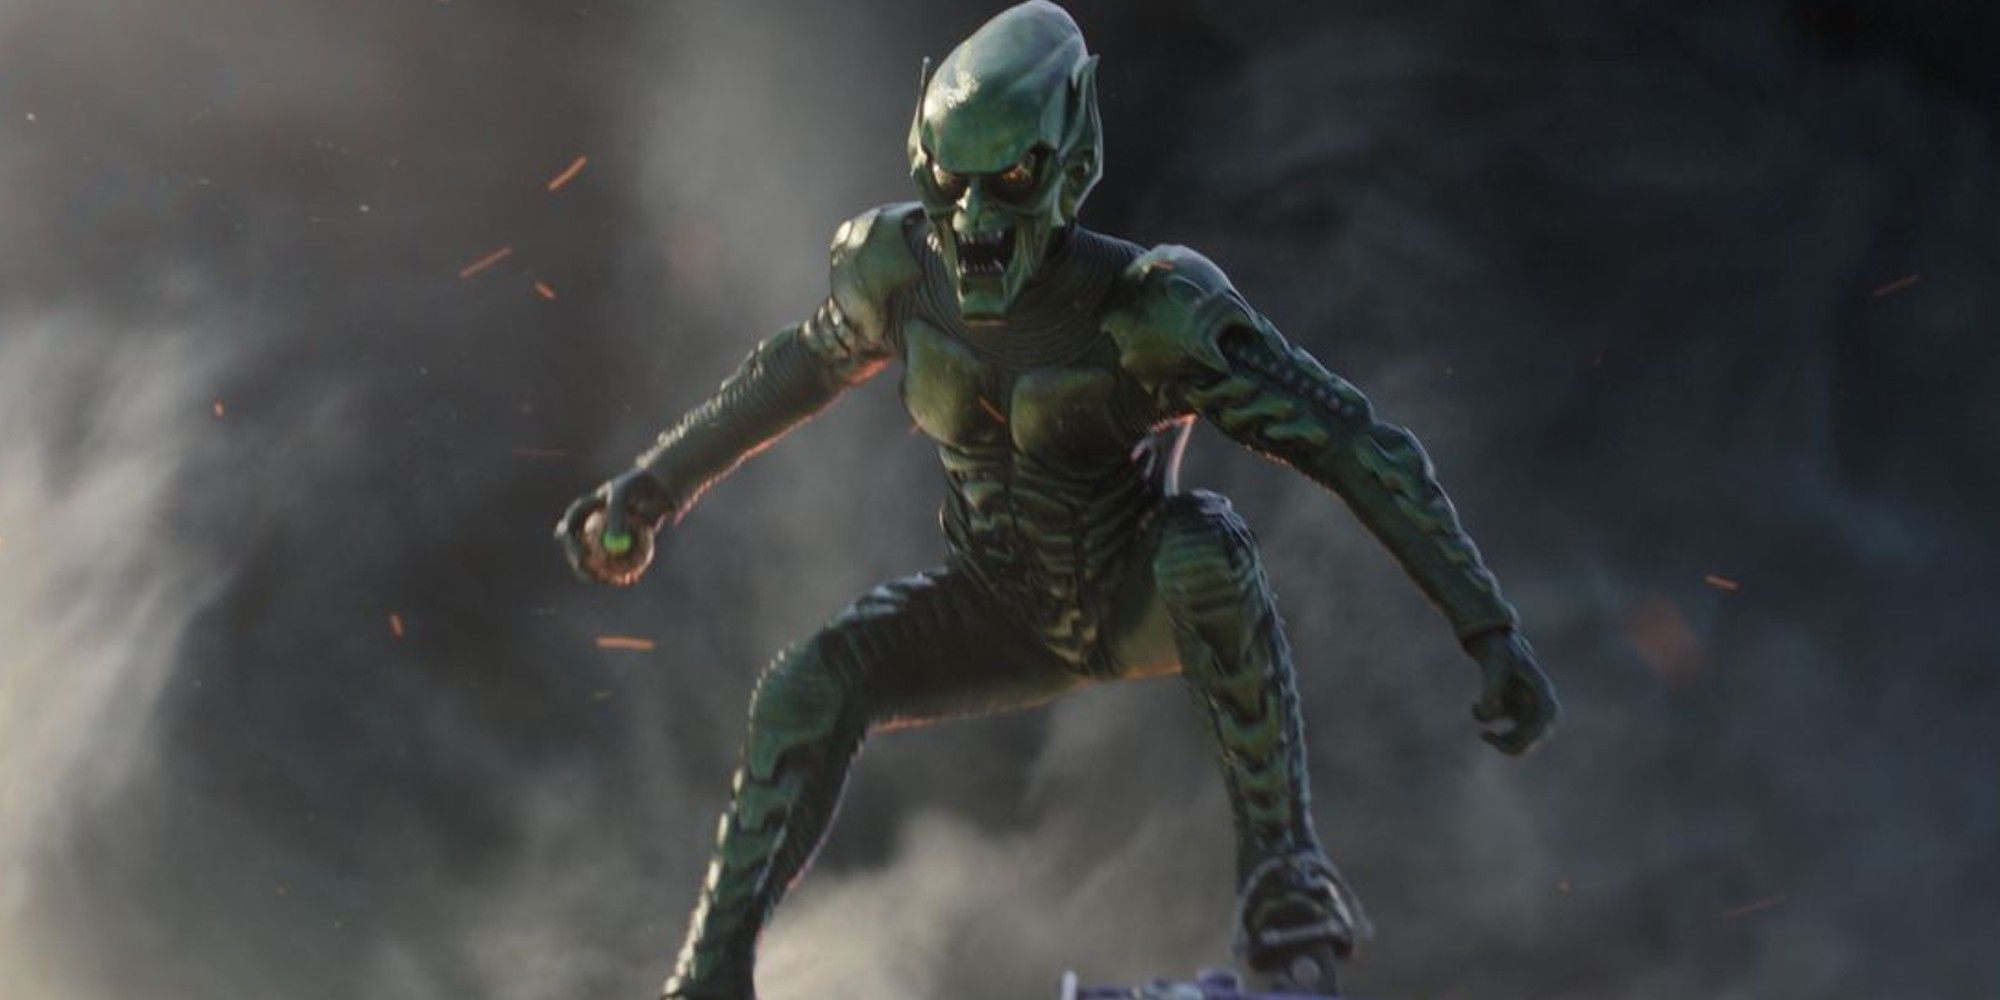 Green Goblin emerges from smoke in Spider-Man No Way Home